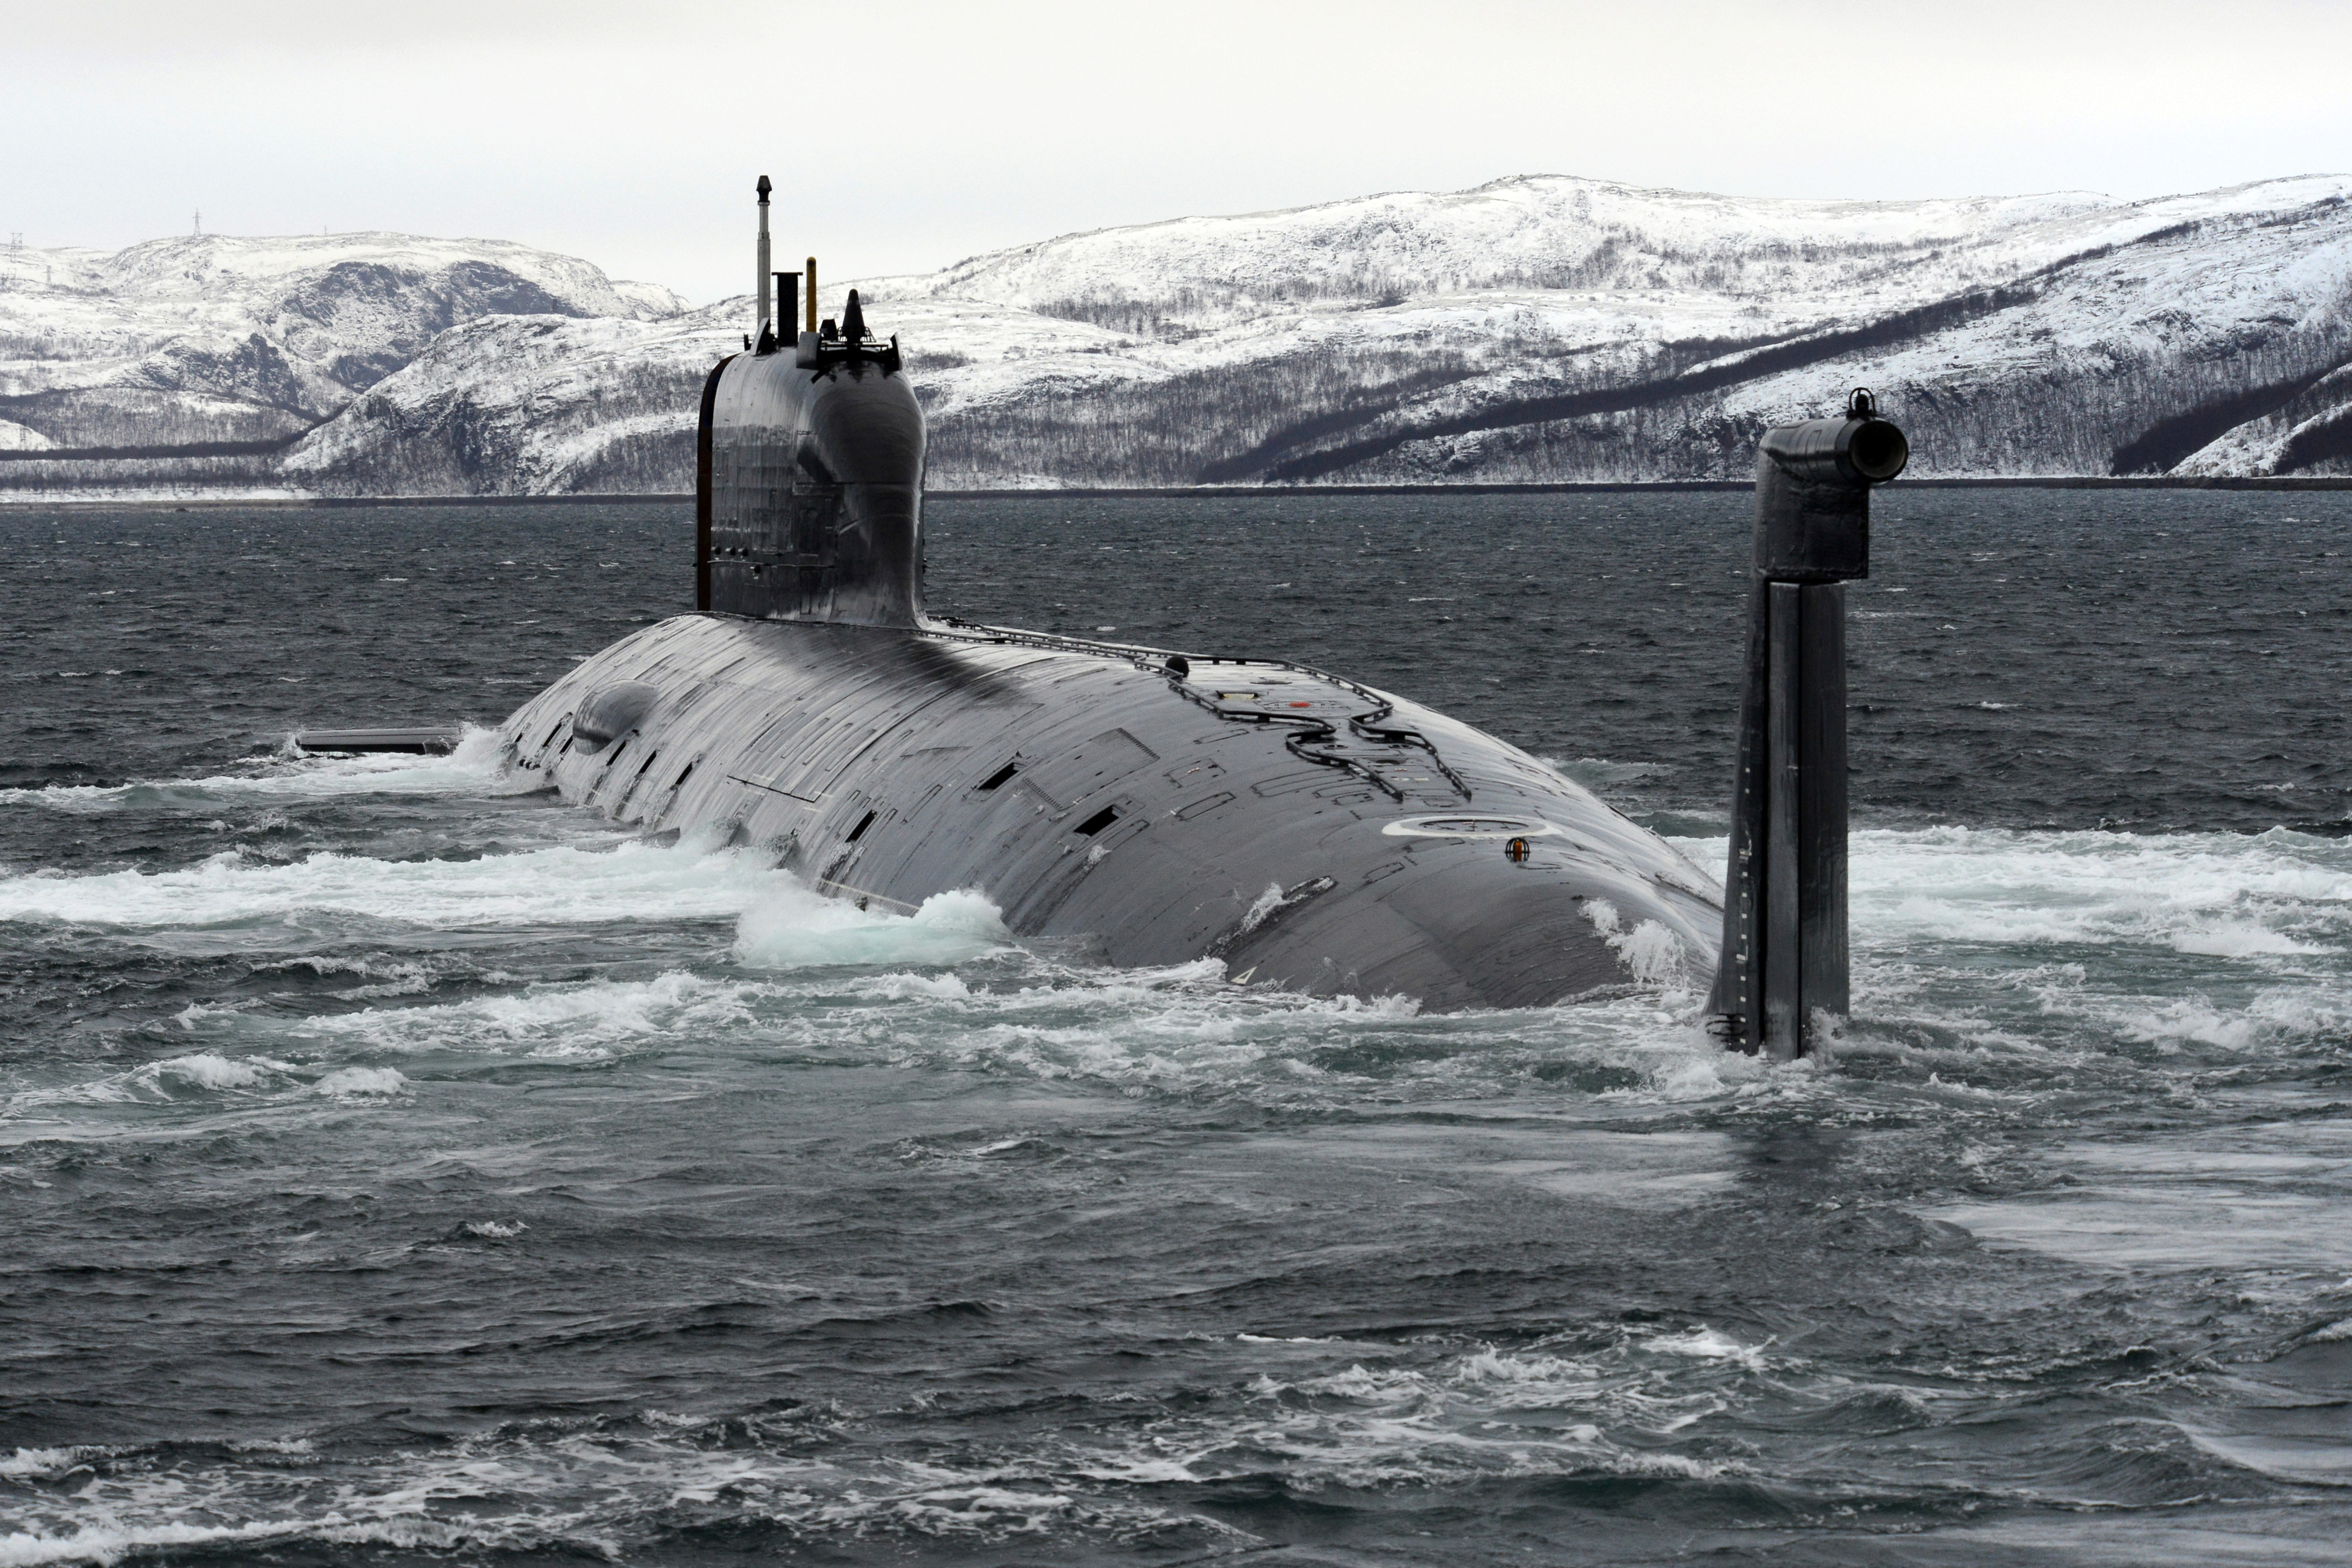 The Russian Northern Fleet's Severodvinsk nuclear submarine during an exercise off Zapadnaya Litsa Base to test a new submarine escape vessel.